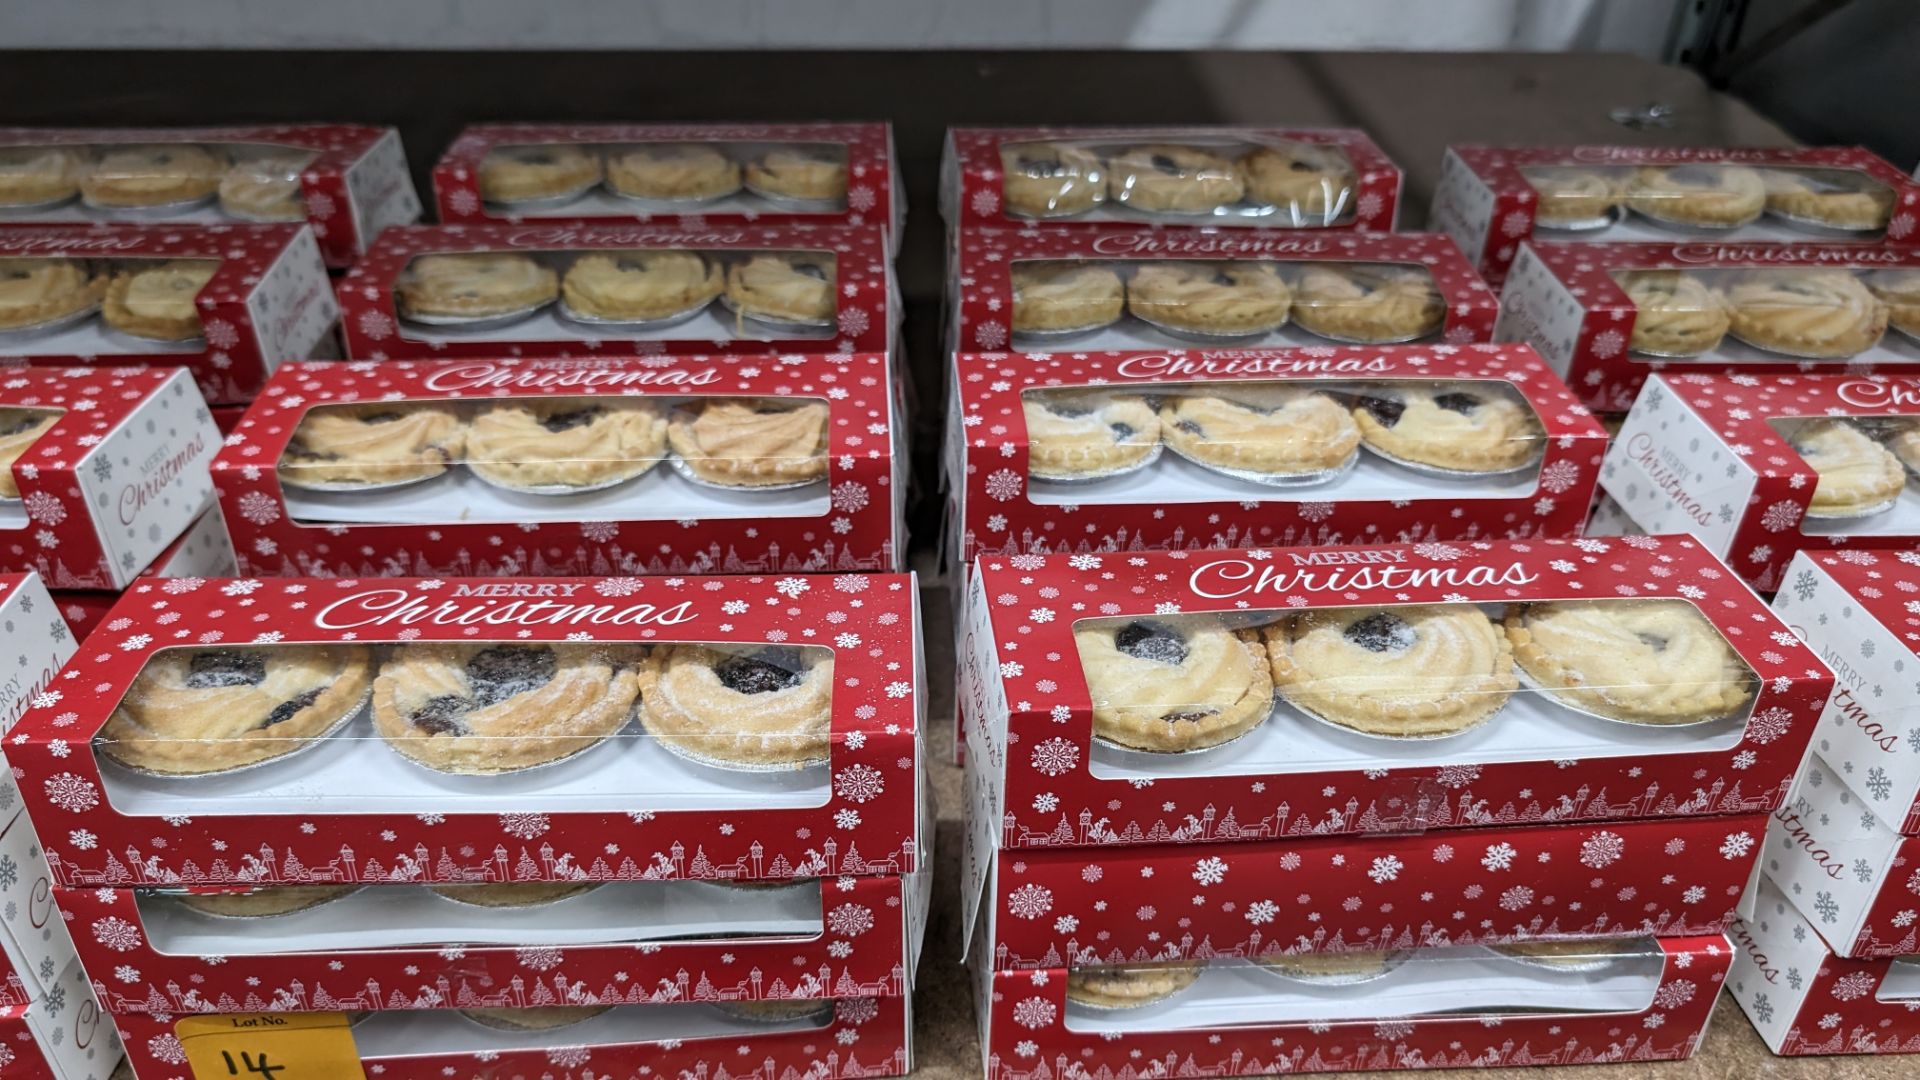 48 off 6 packs of Christmas mince pies. Each pack contains 6 pies on 2 layers & comes in Merry Chri - Image 3 of 5